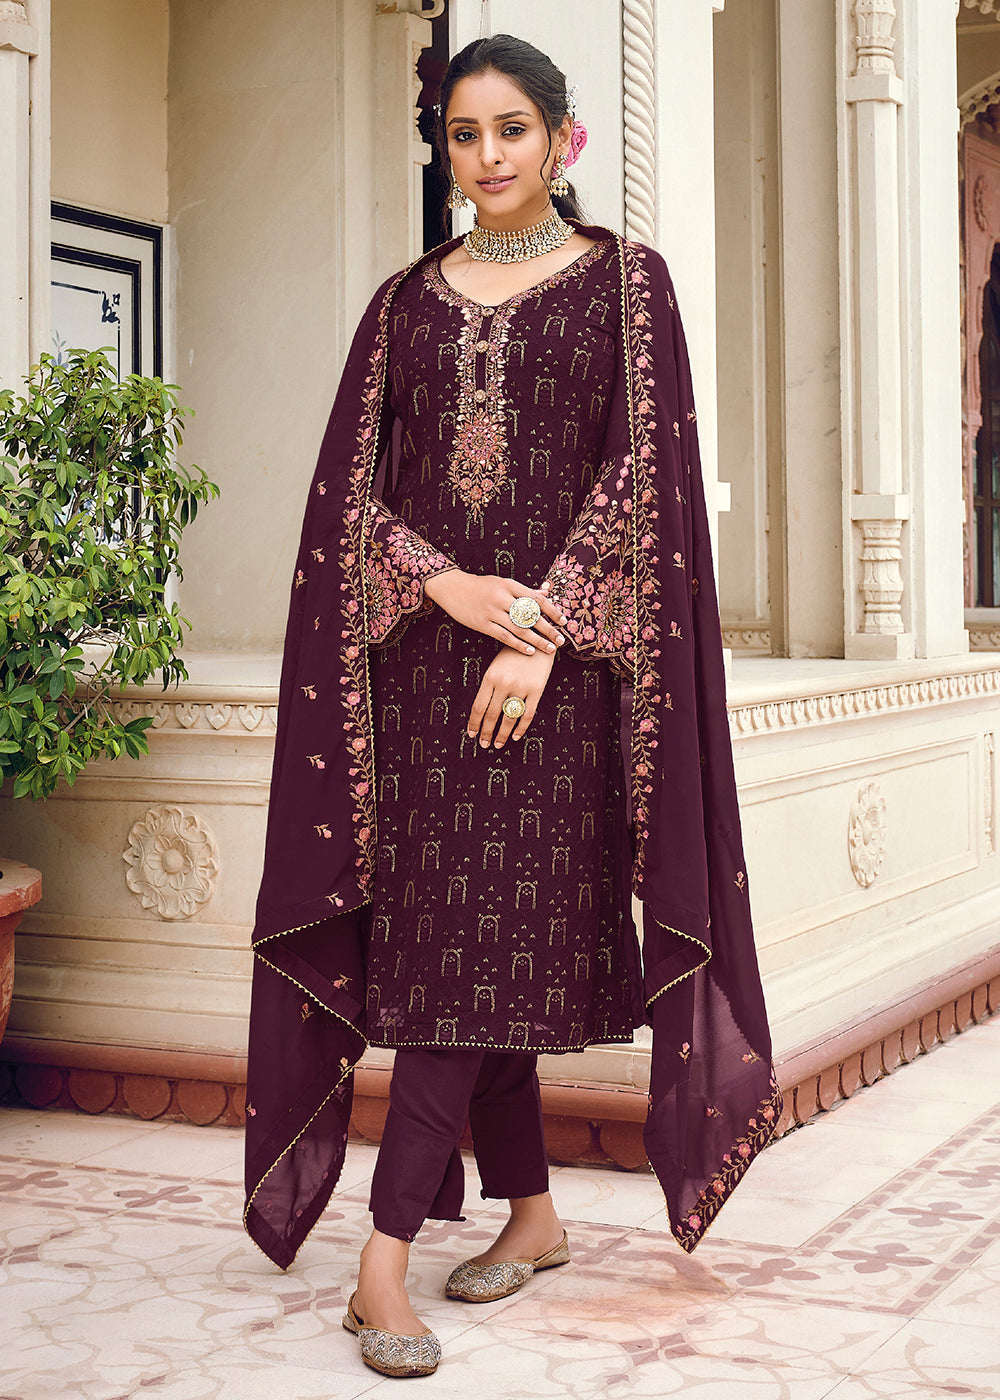 Buy Yellow Faux Georgette Ceremonial Pant Style Suit Online